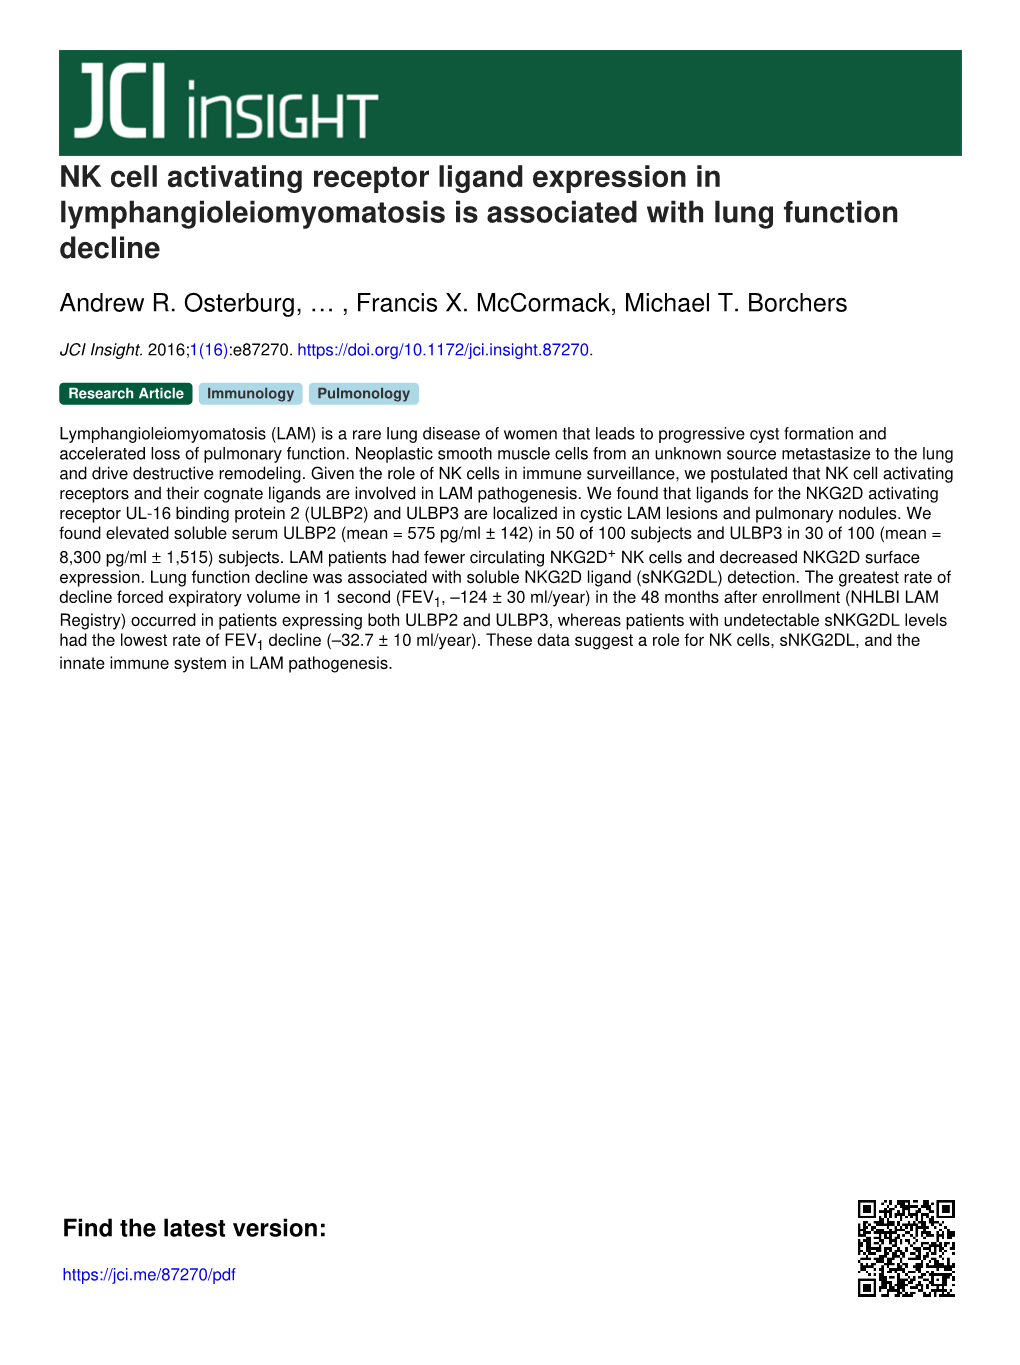 NK Cell Activating Receptor Ligand Expression in Lymphangioleiomyomatosis Is Associated with Lung Function Decline